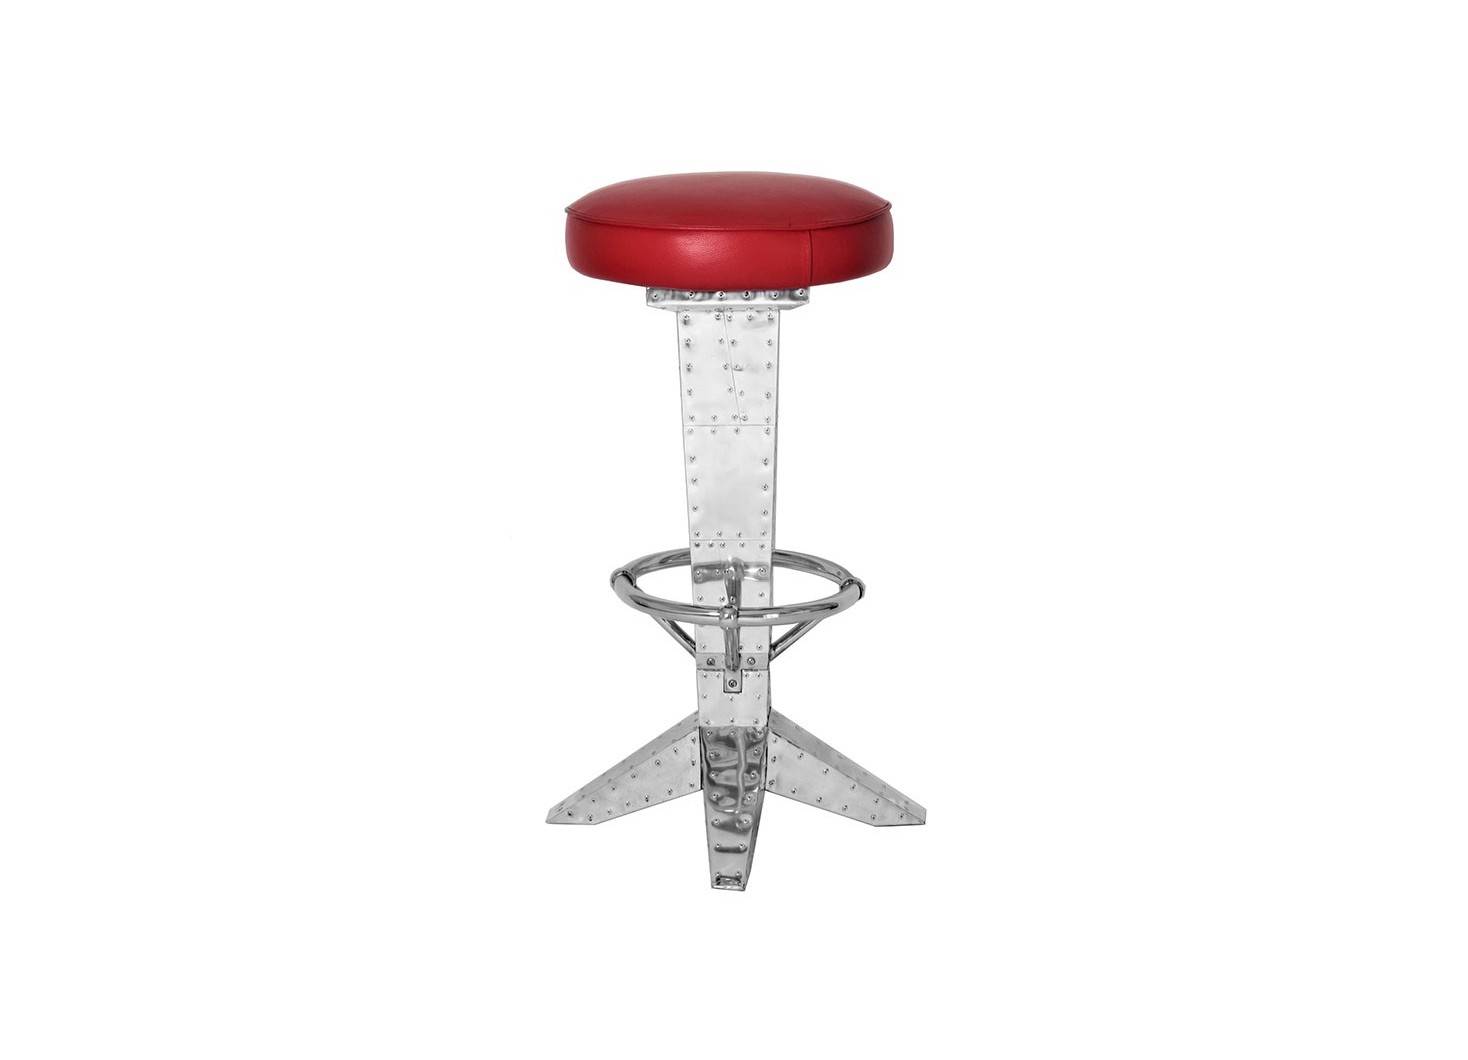 Aviator stool - Red leather